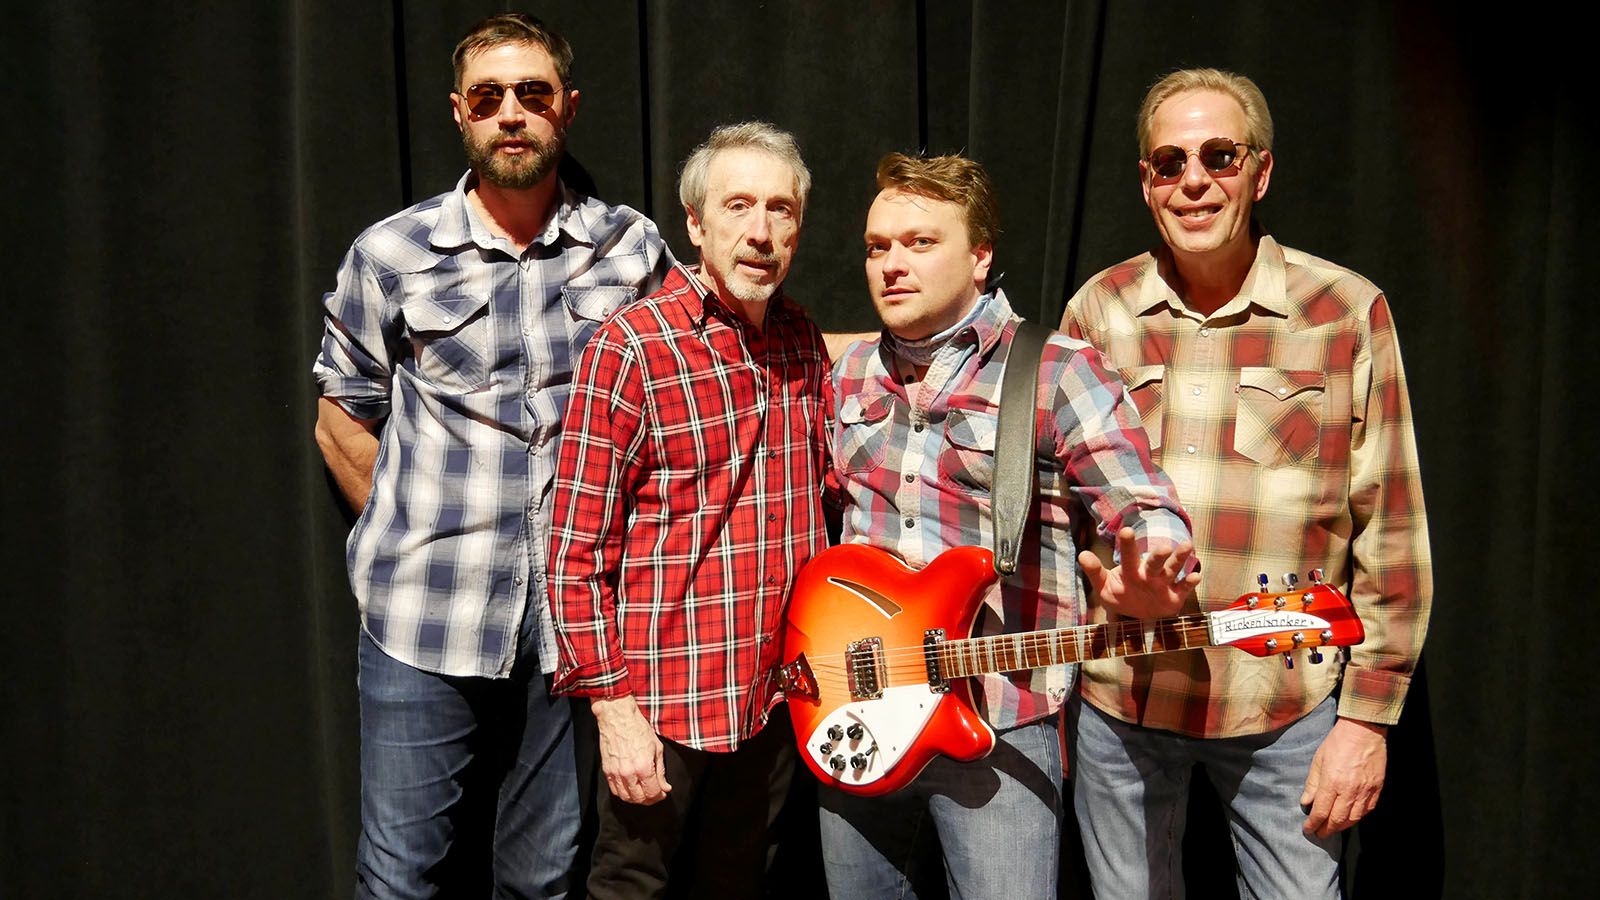 The tribute band Bayou County will perform the music of Creedence Clearwater Revival on May 11 at Baker Street Centre.